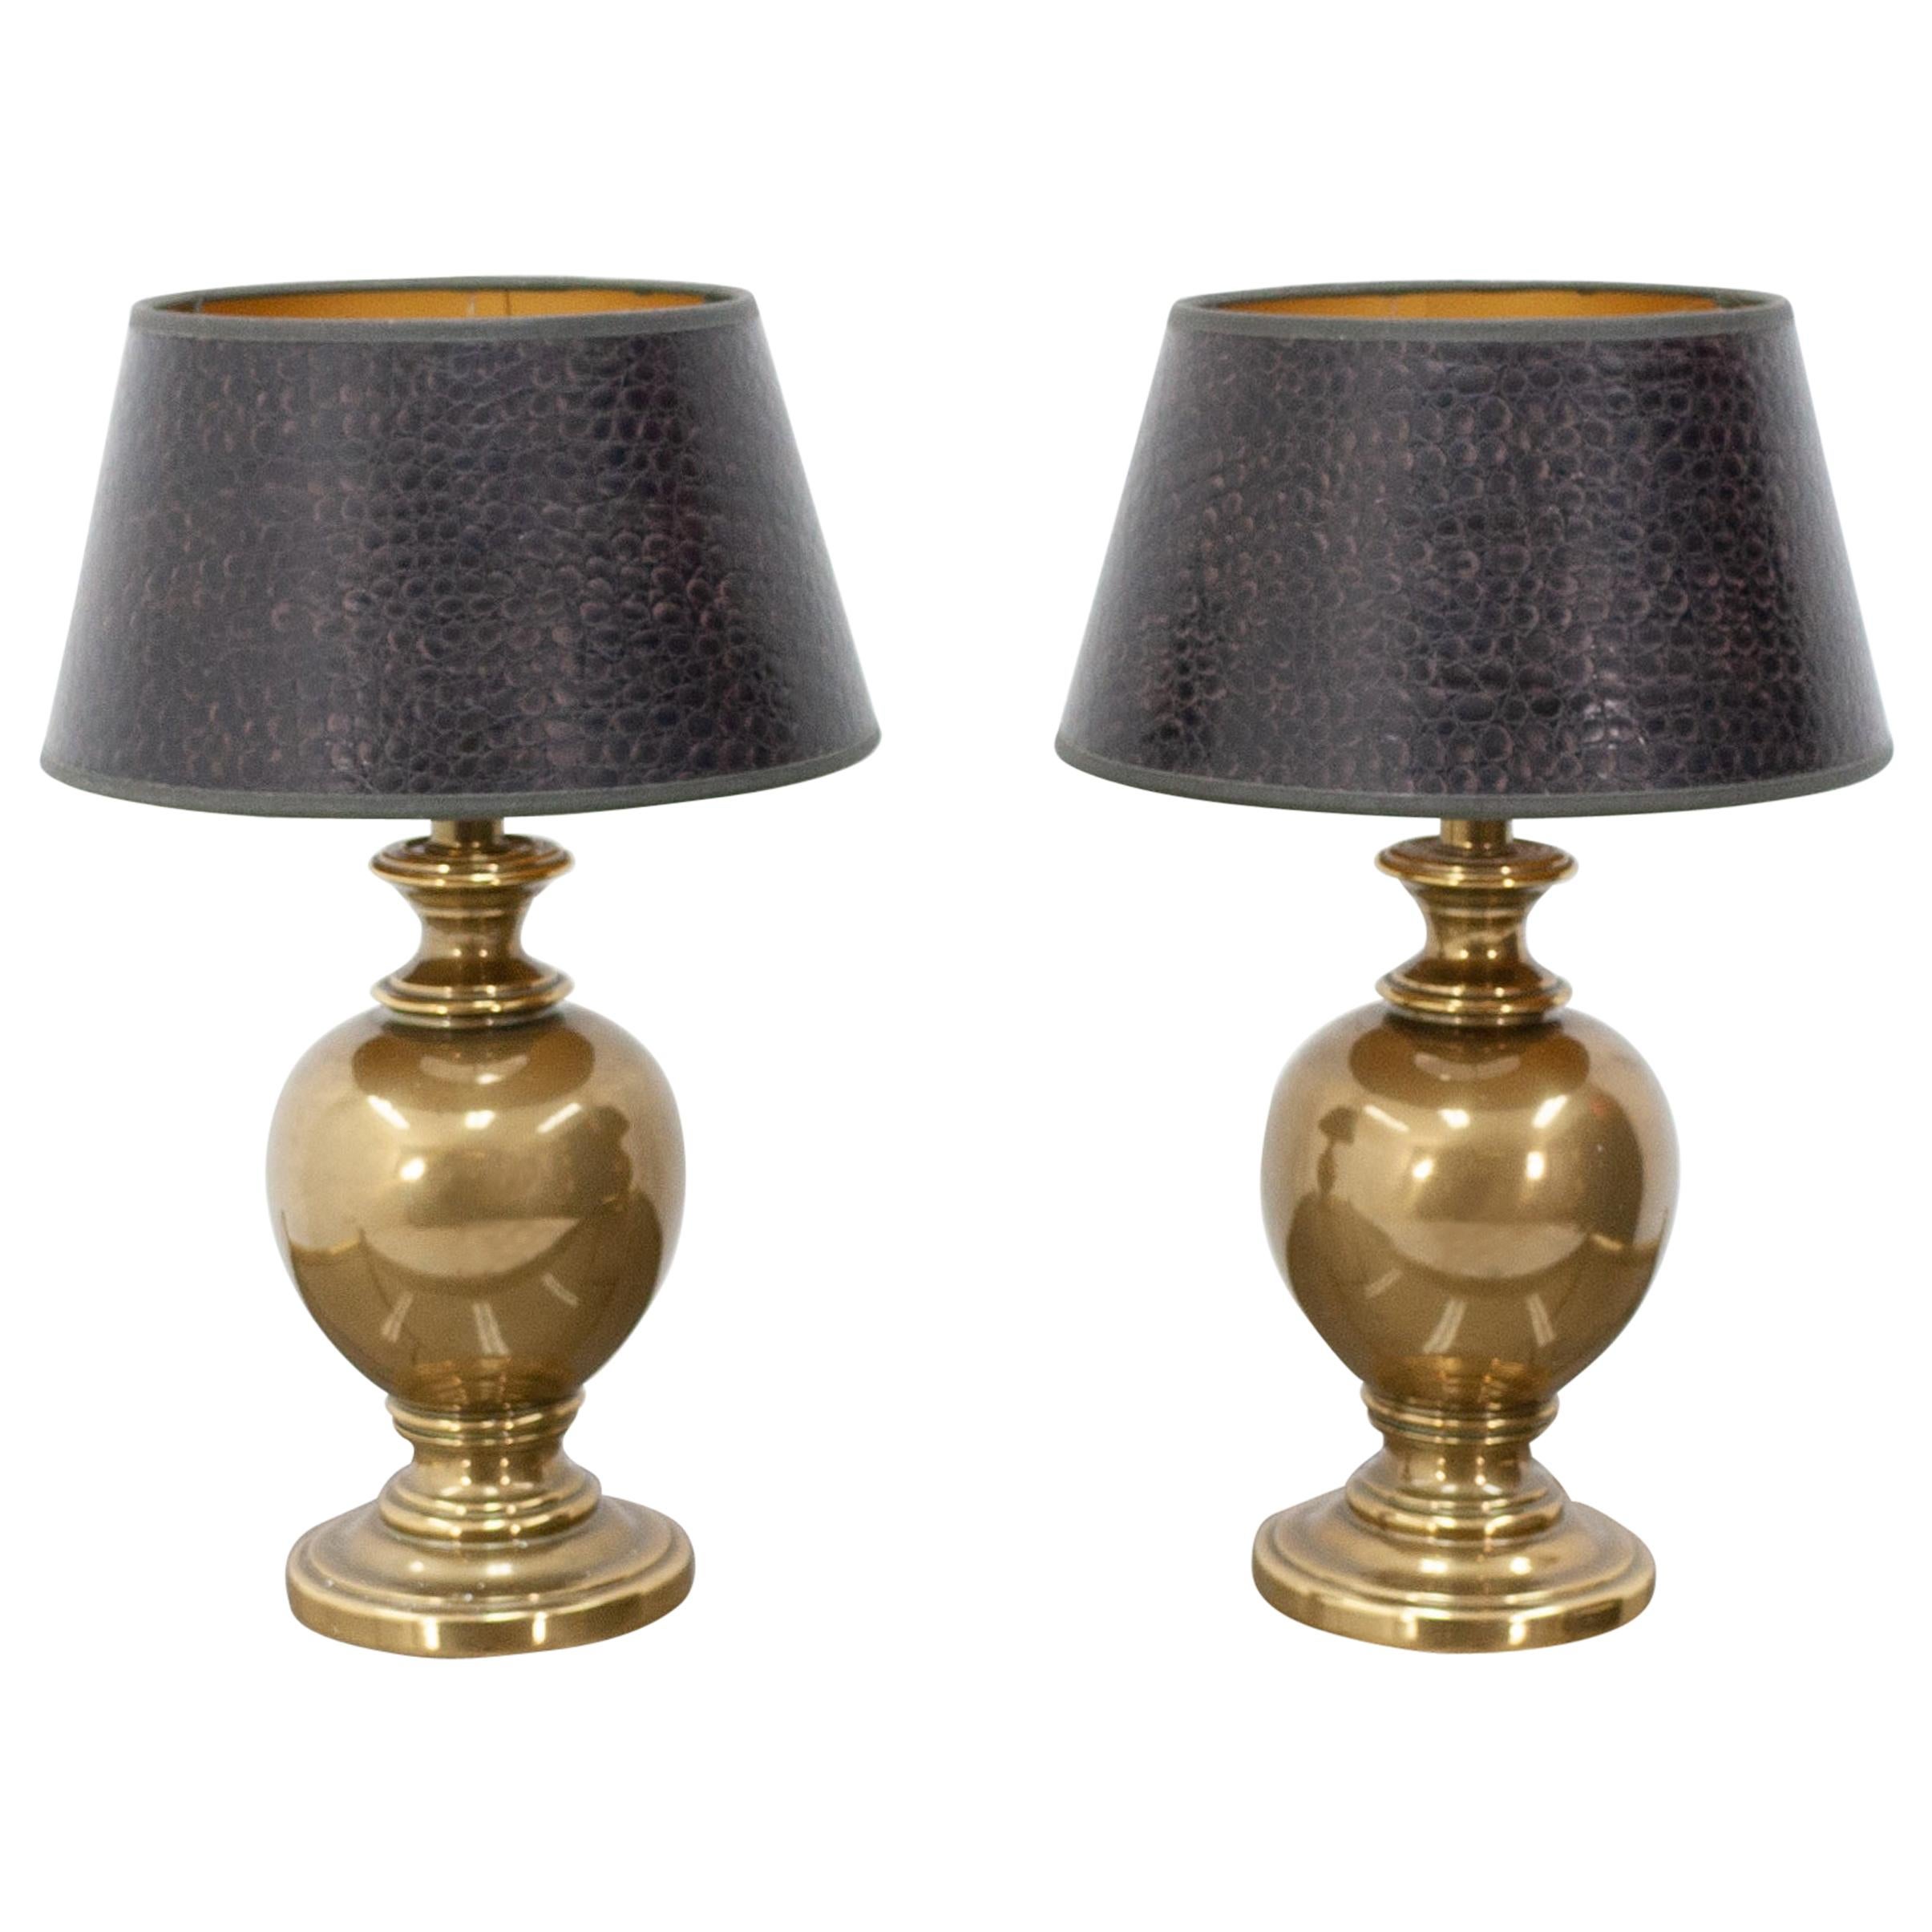 Kuhlmann Table Lamps Germany, 1970s